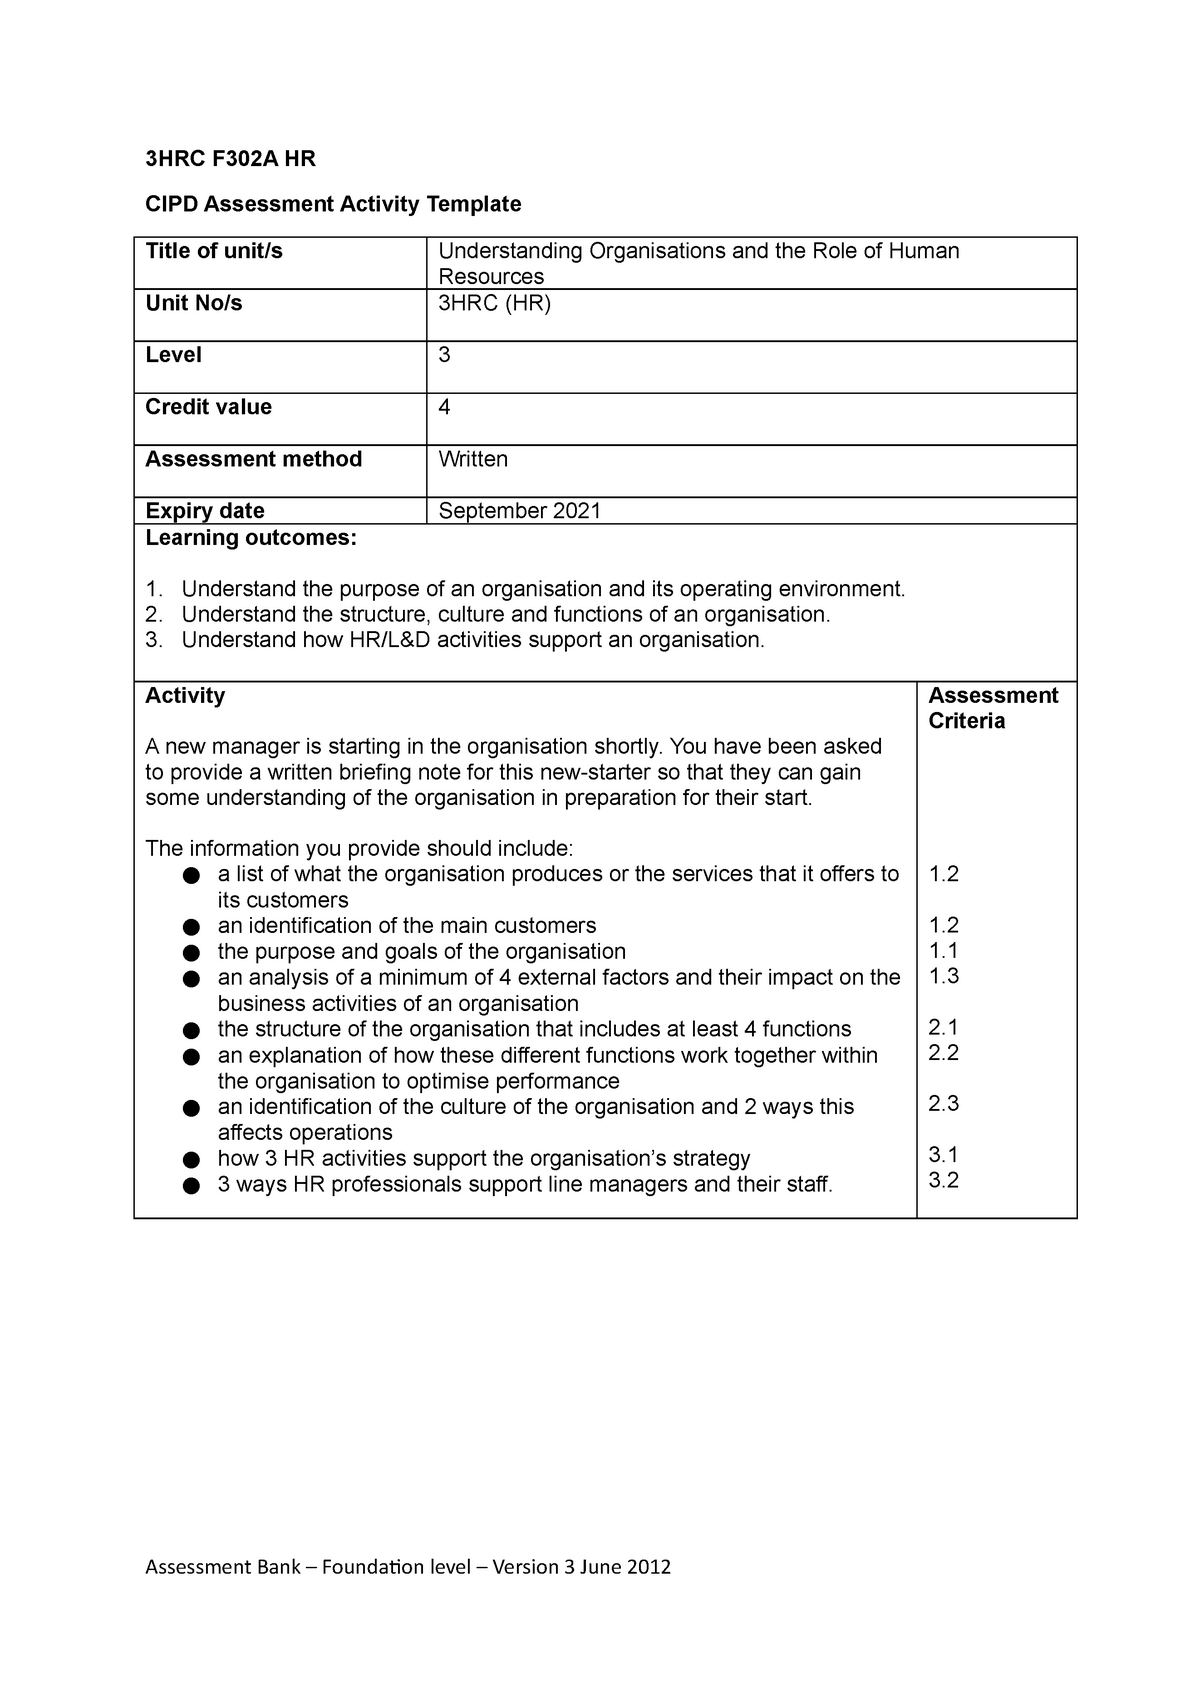 cipd level 5 uin assignment examples